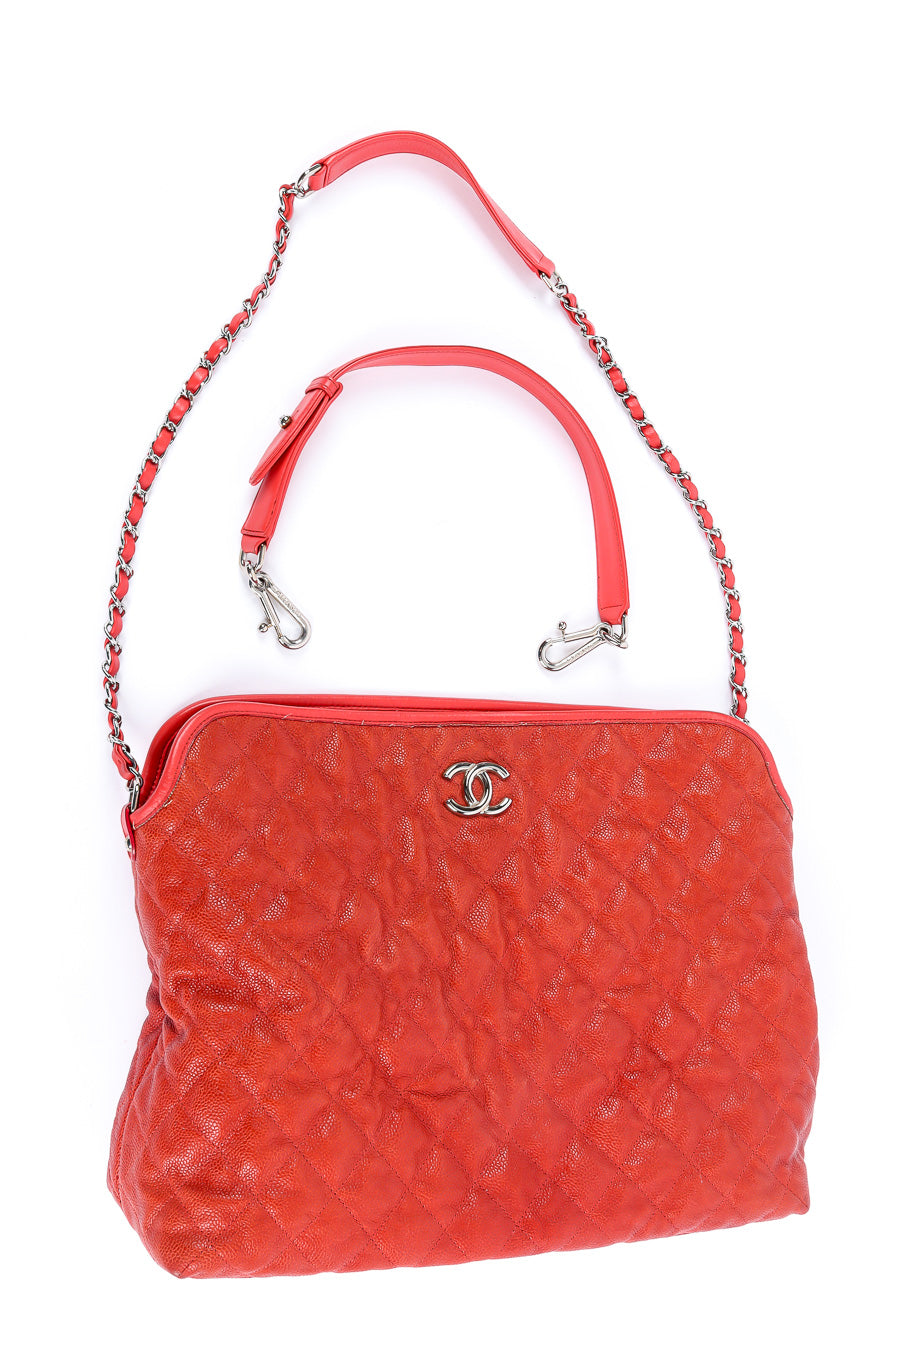 French riviera quilted hobo bag straps detail @recessla